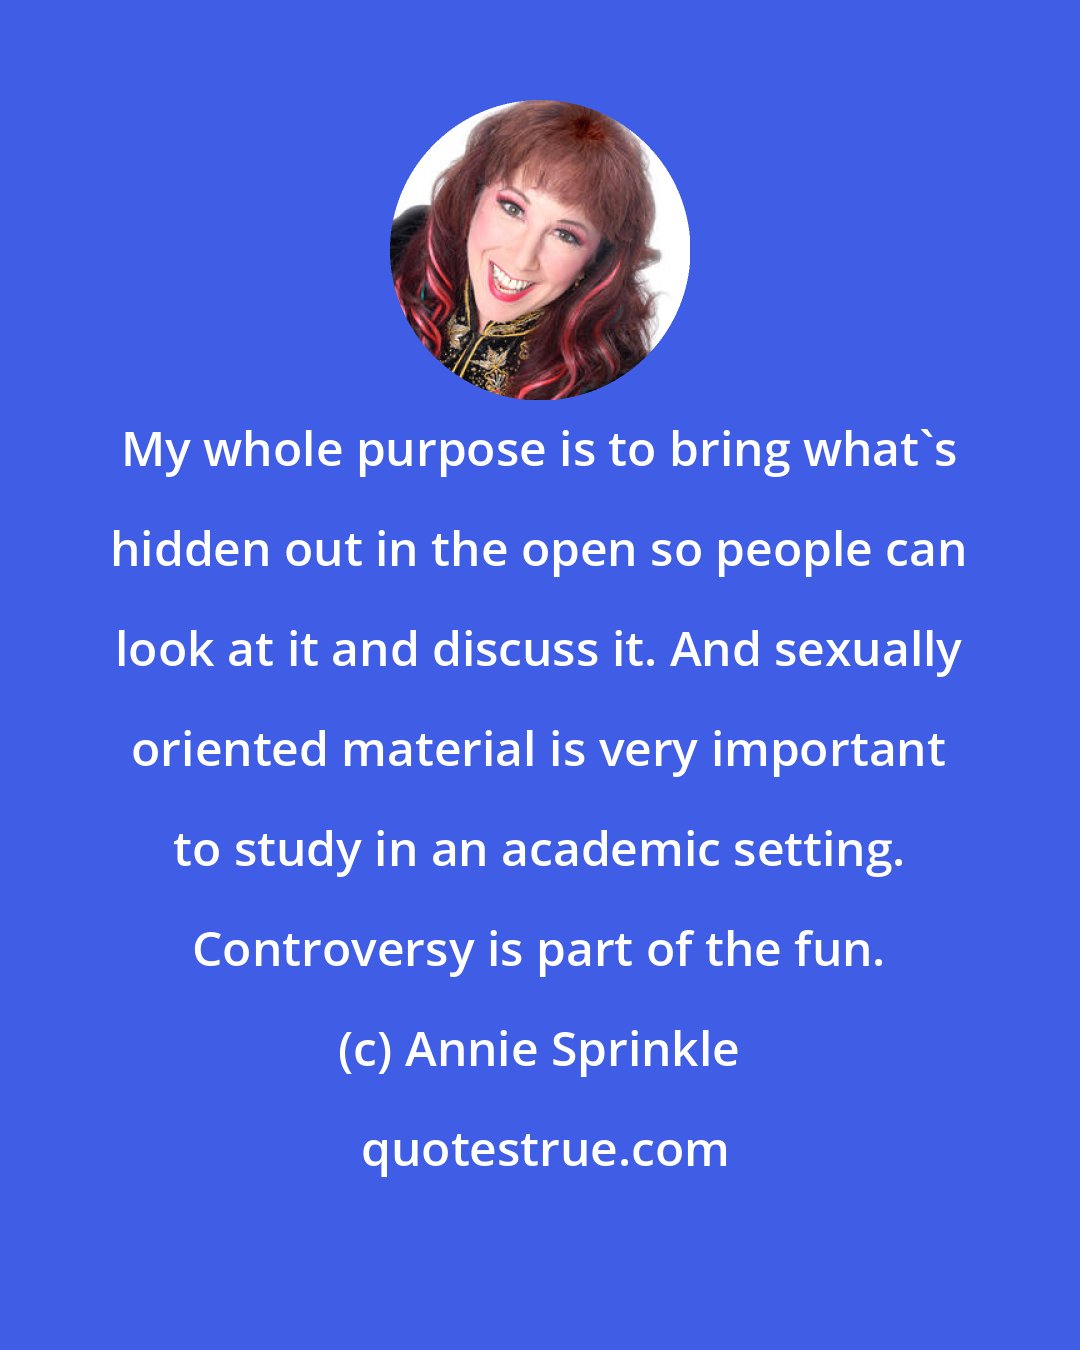 Annie Sprinkle: My whole purpose is to bring what's hidden out in the open so people can look at it and discuss it. And sexually oriented material is very important to study in an academic setting. Controversy is part of the fun.